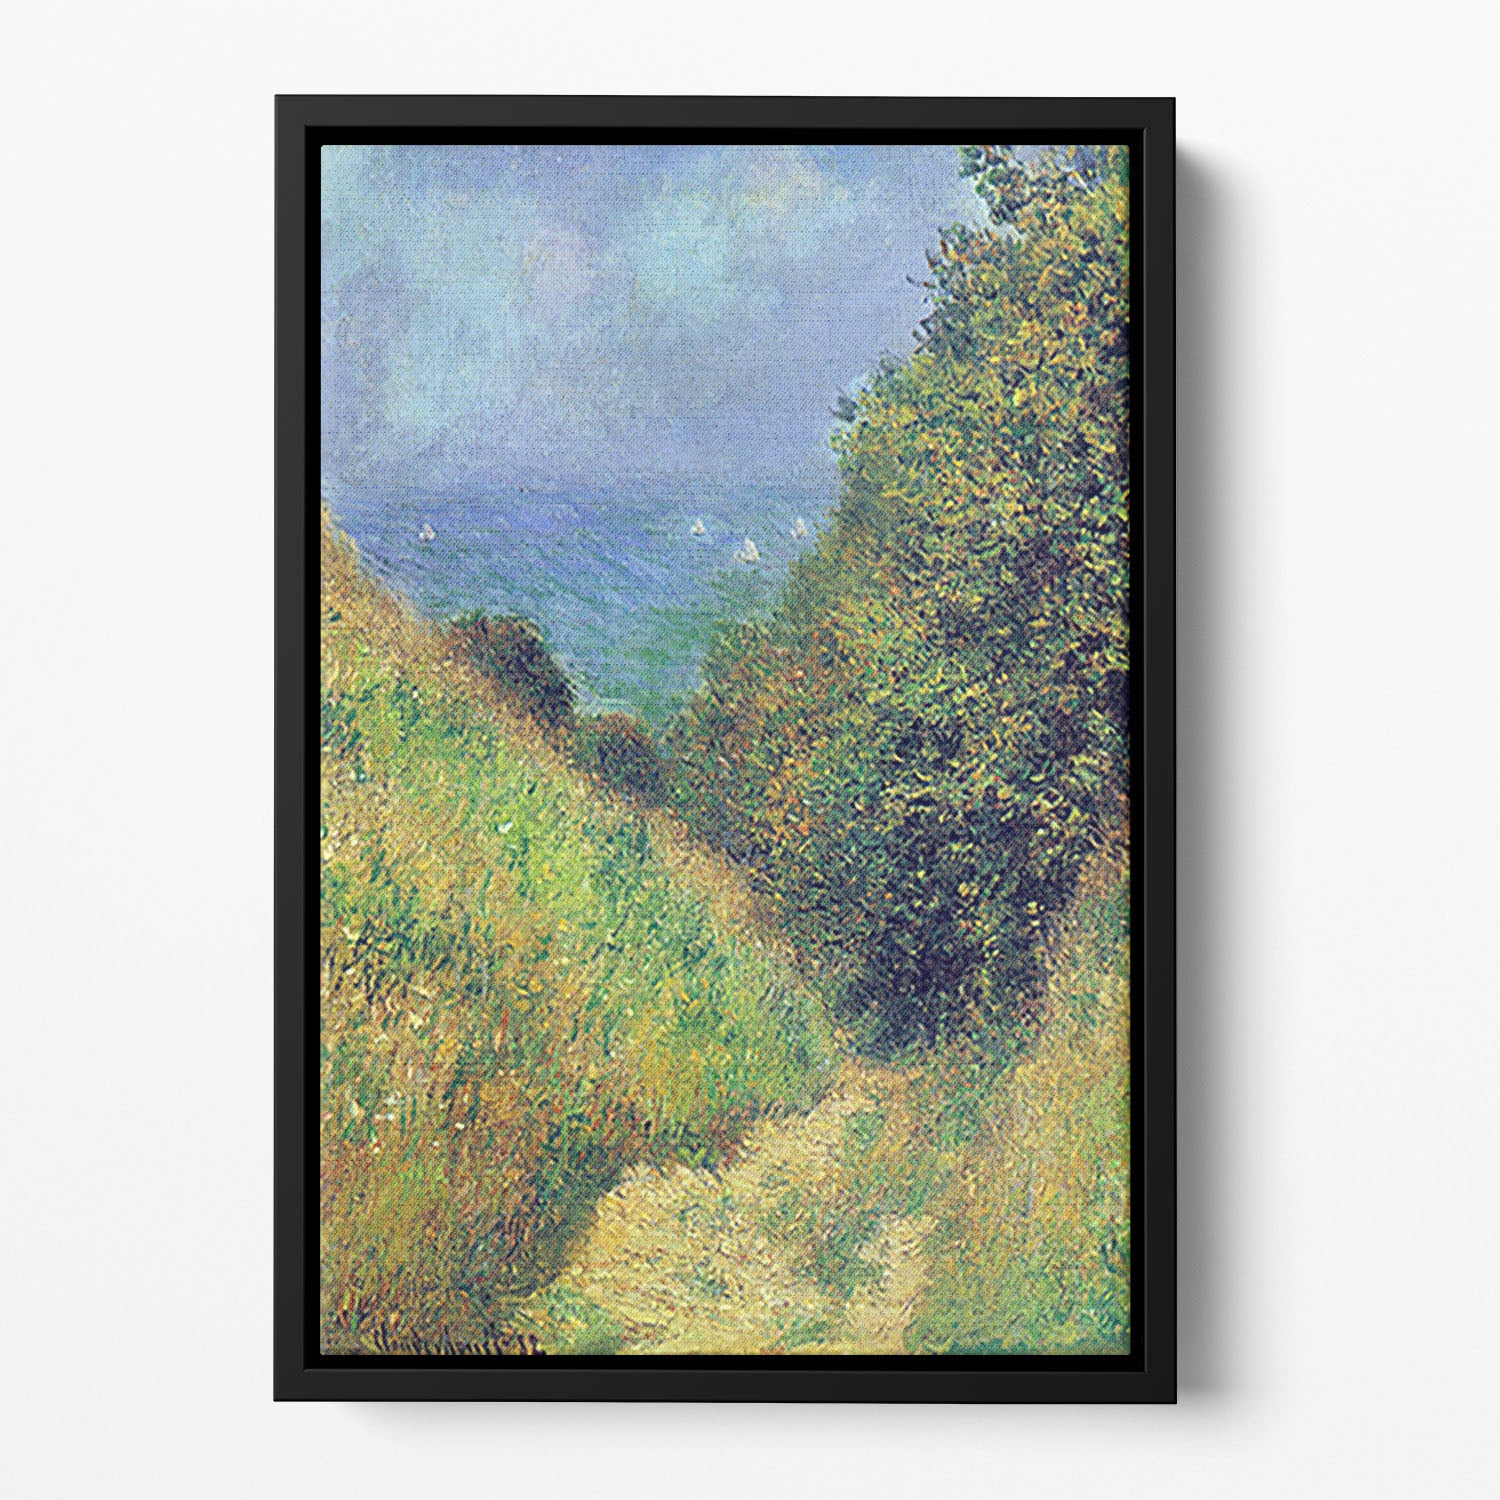 Pourville 2 by Monet Floating Framed Canvas